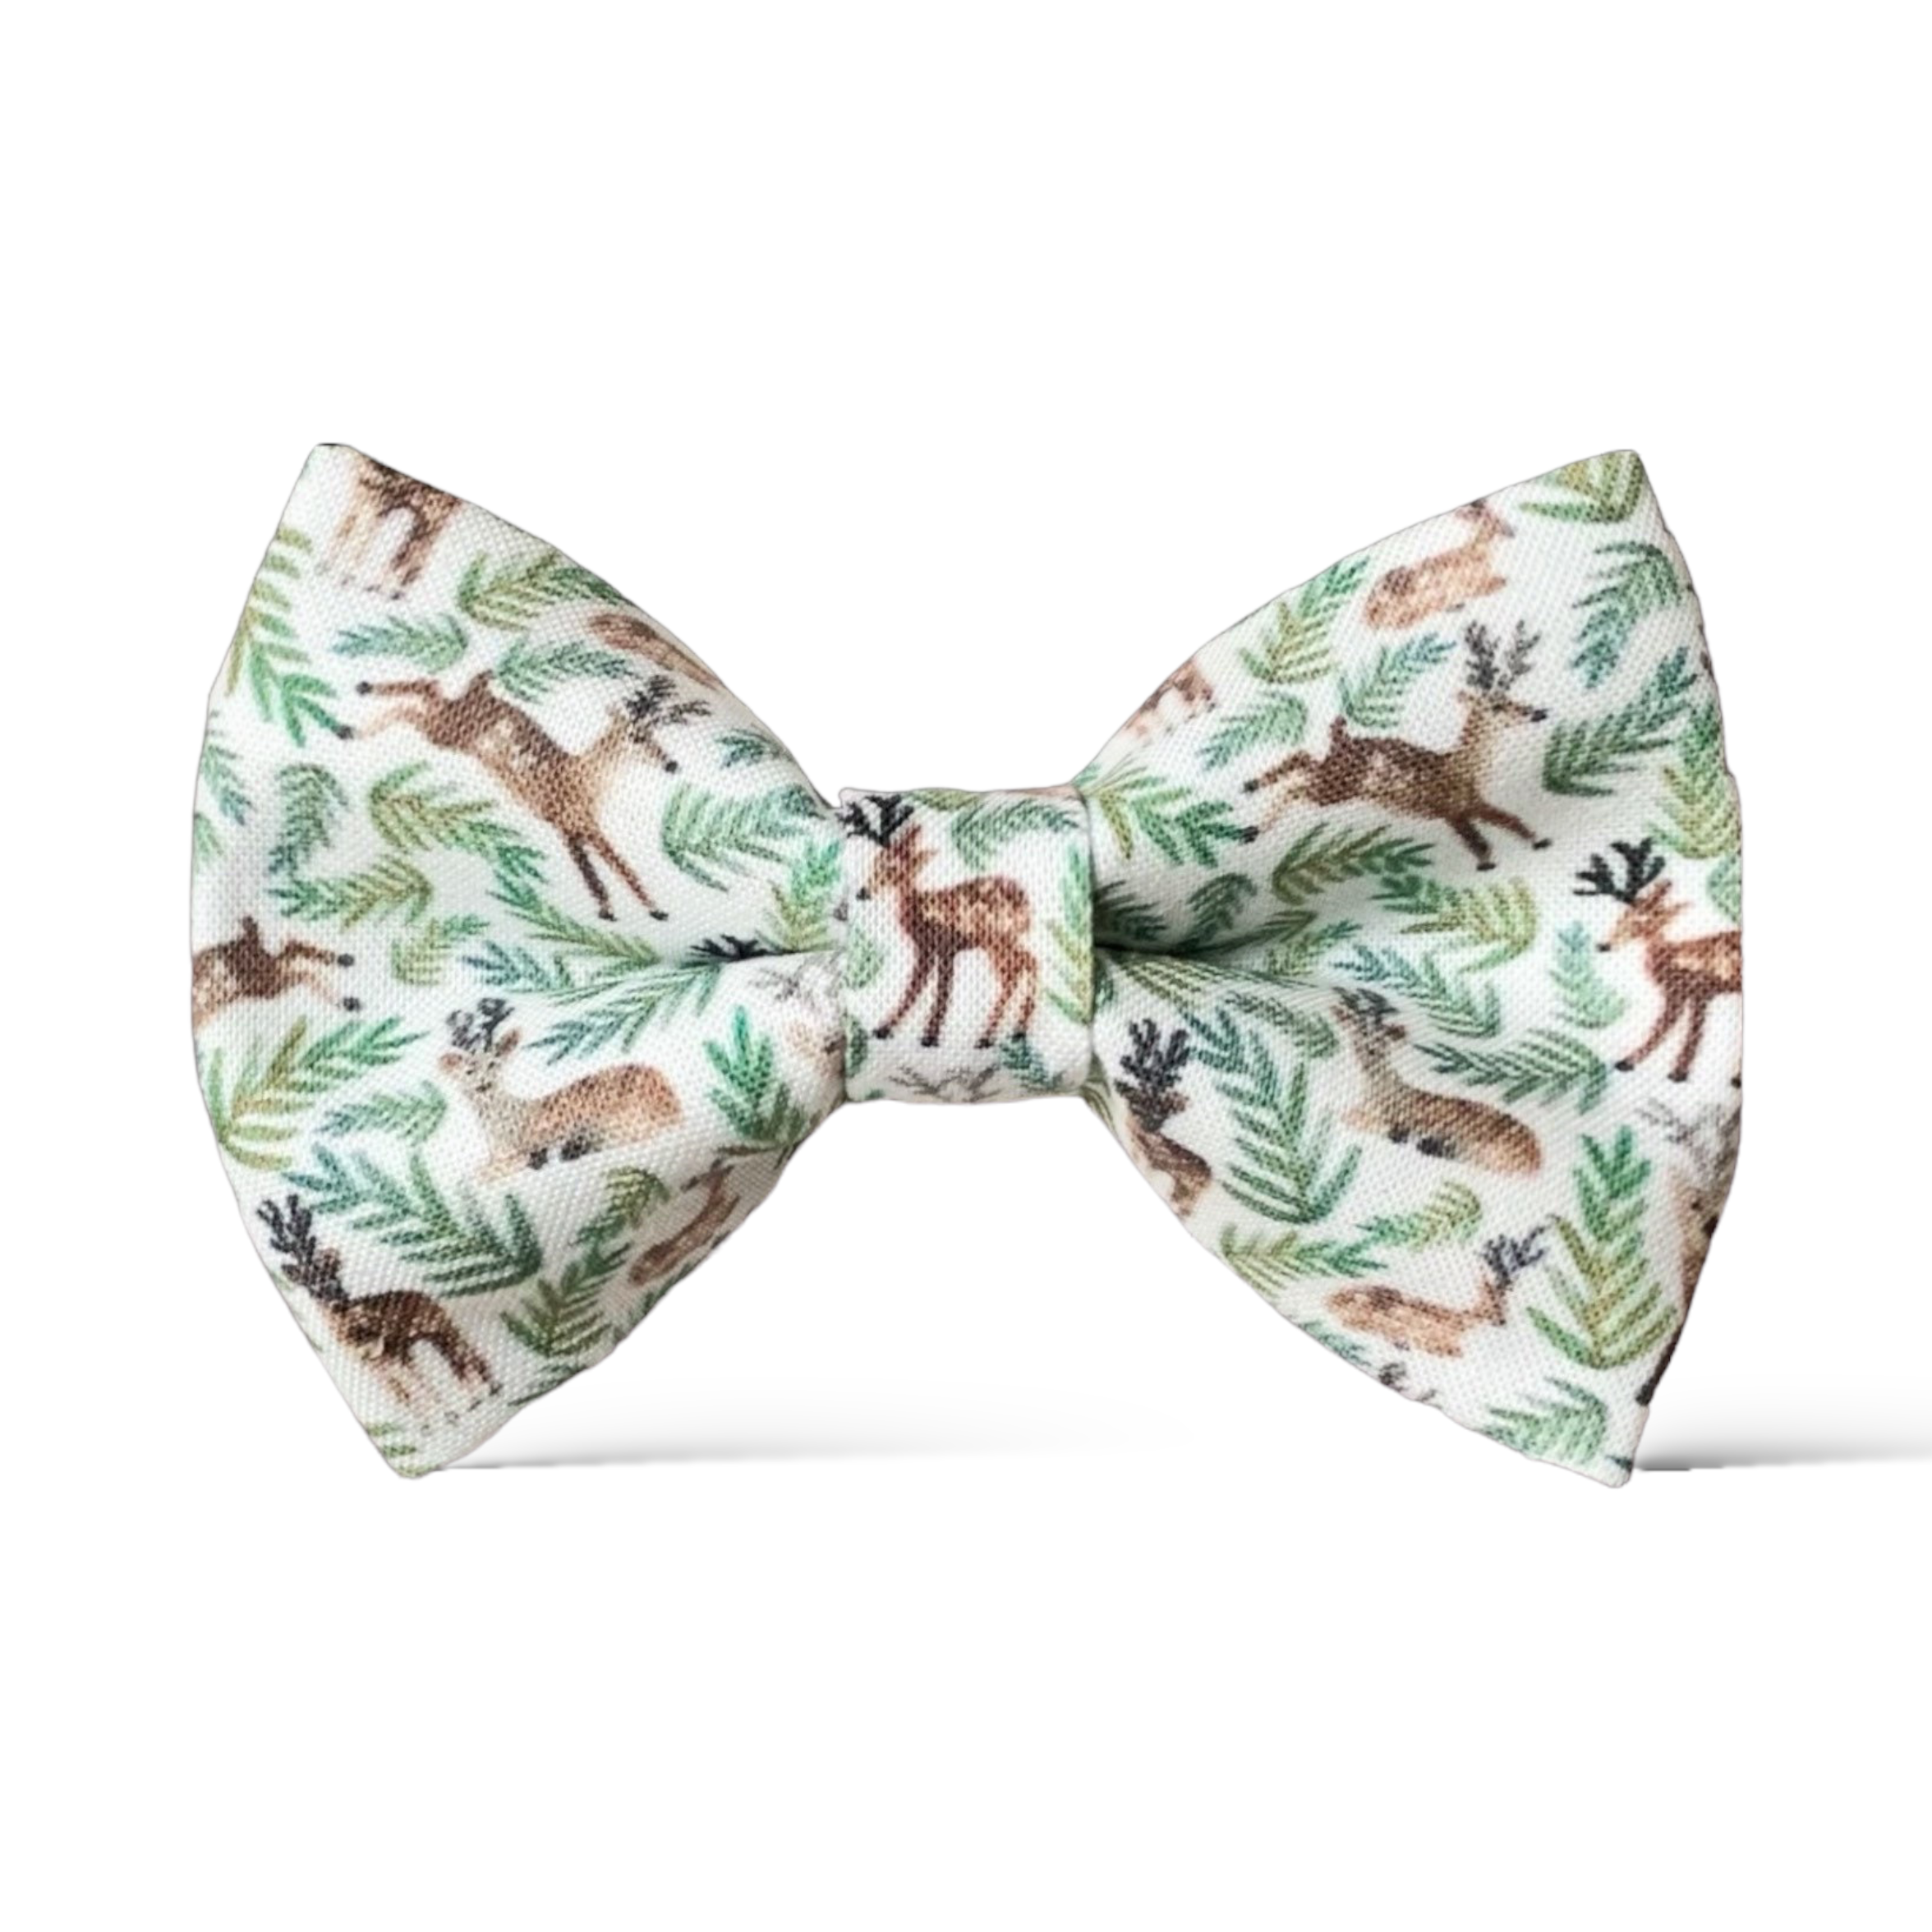 Whimsical Reindeer Cotton Bow Tie